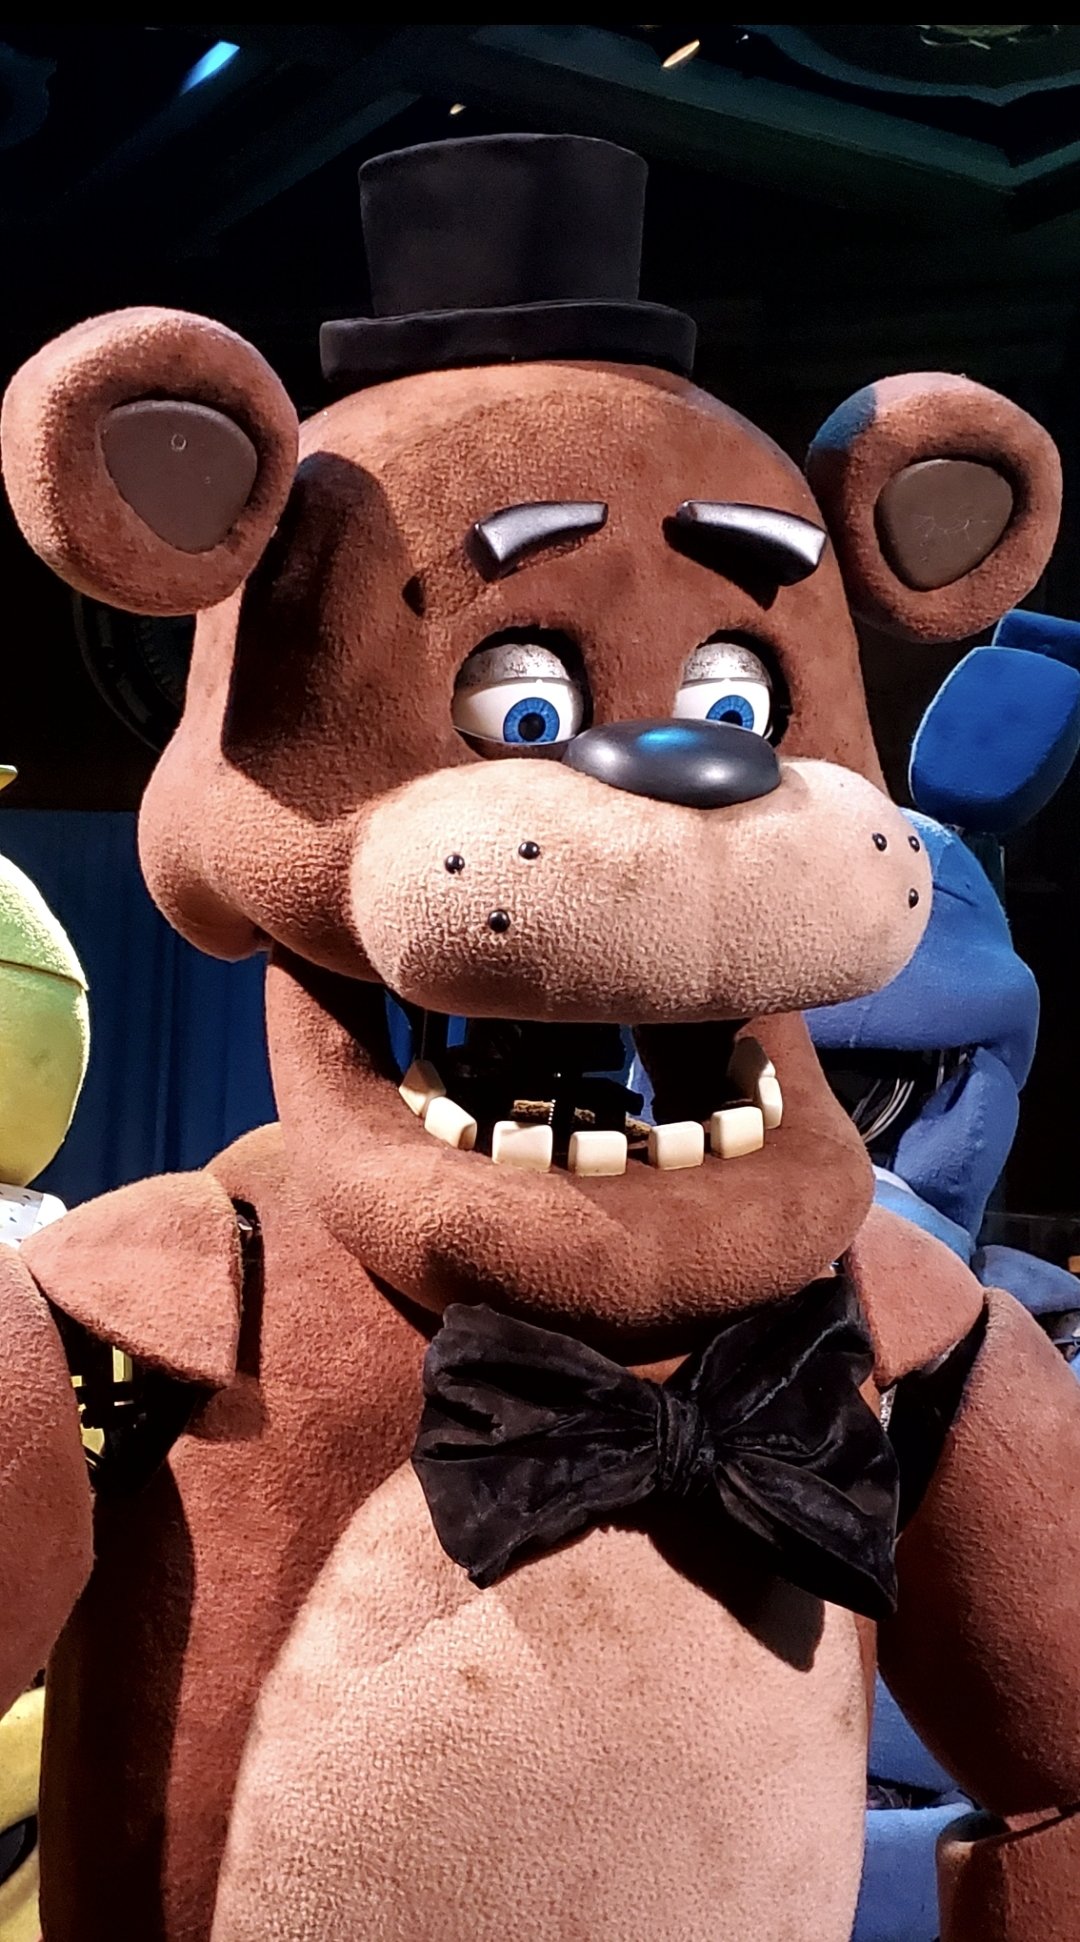 DiscussingFilm on X: A closer look at the Freddy Fazbear animatronic used  in 'FIVE NIGHTS AT FREDDY'S'.  / X